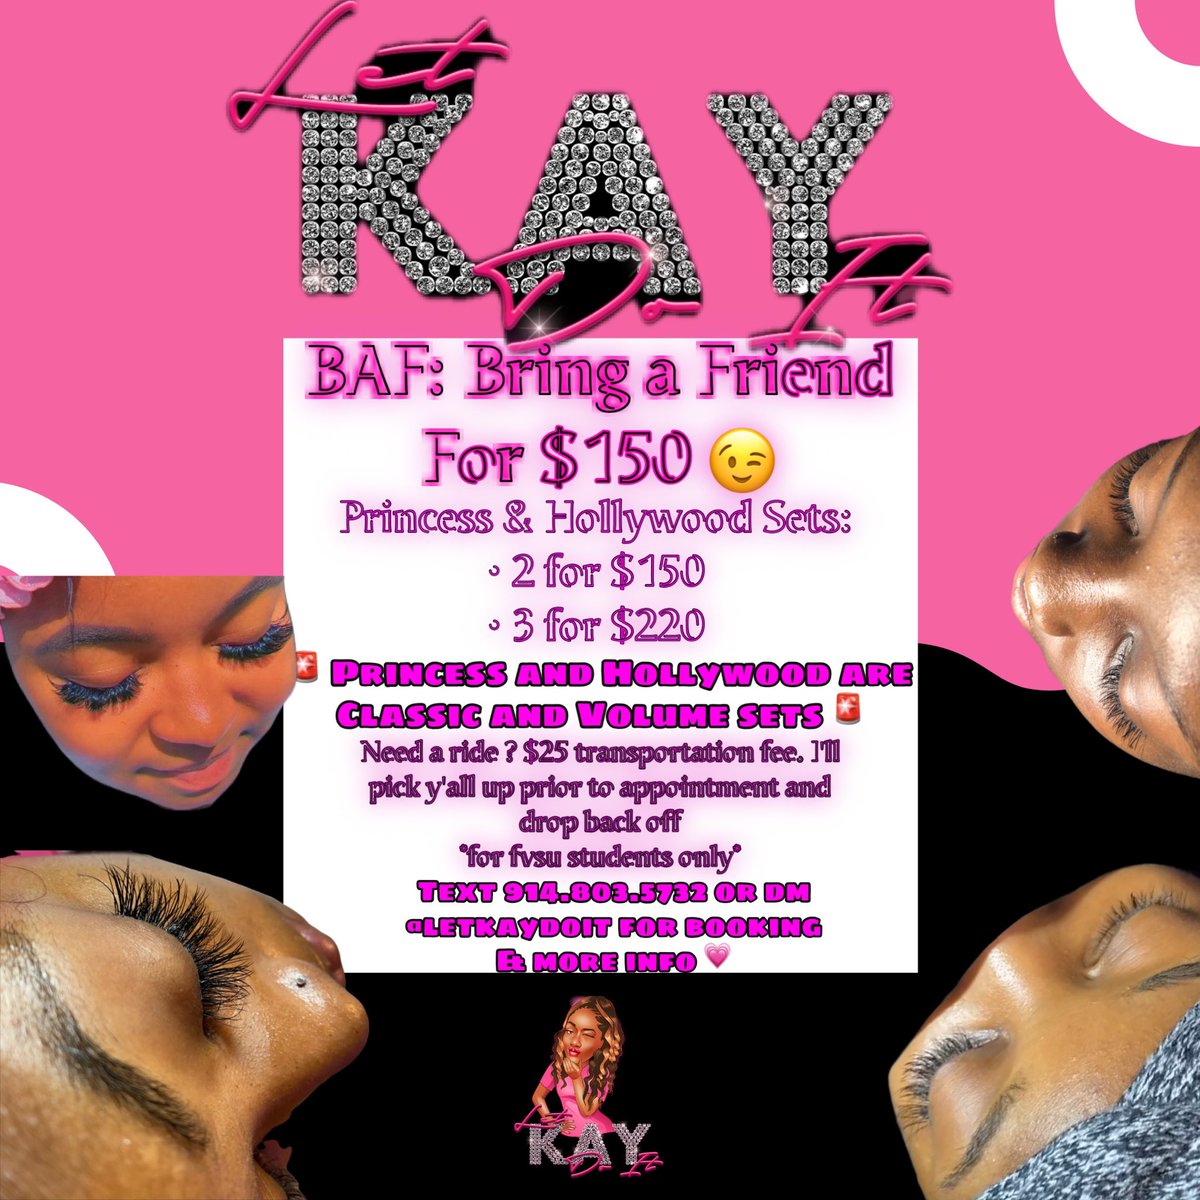 #MARCHMADNESS #SPRINGBREAK2k23 💙🫣 yk @letkaydoit got the PERFECT DEALS for you and GANGGG 🤯‼️ #BAF #bringafriend RIDING ROUND WITH TWINEM AND WE BOTH LOOK GOOD ASF🥳🤩 #letkaydoit #fvsu #nailtech #atlnailtech #maconnailtech
DM ME OR @letkaydoit FOR BOOKING AND MORE INFO ‼️